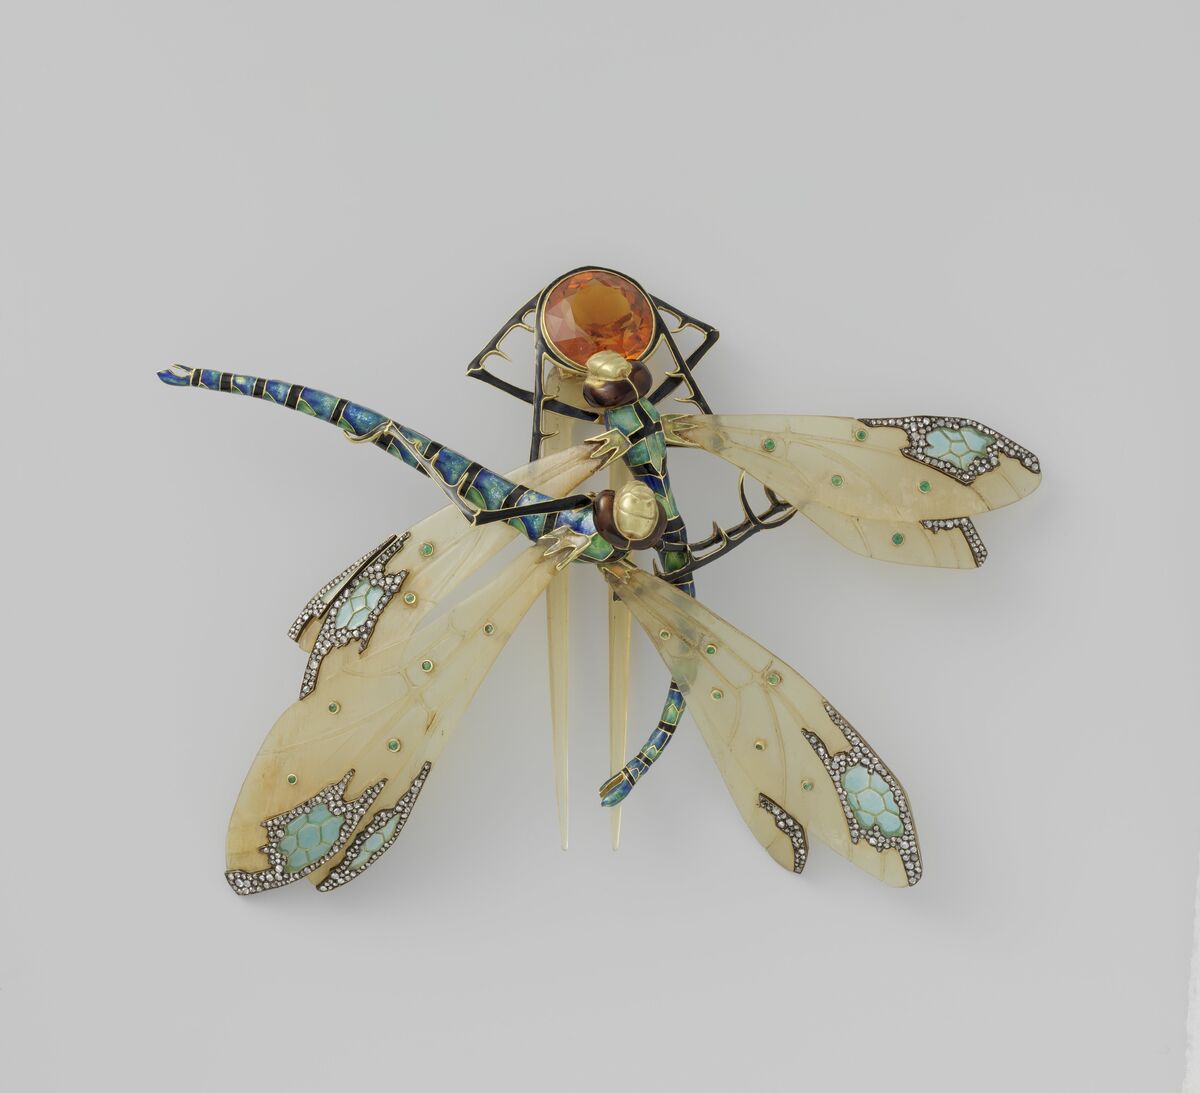 Lucien Gaillard, Comb in the form of two dragonflies, ca. 1904. Courtesy of the Rijksmuseum.